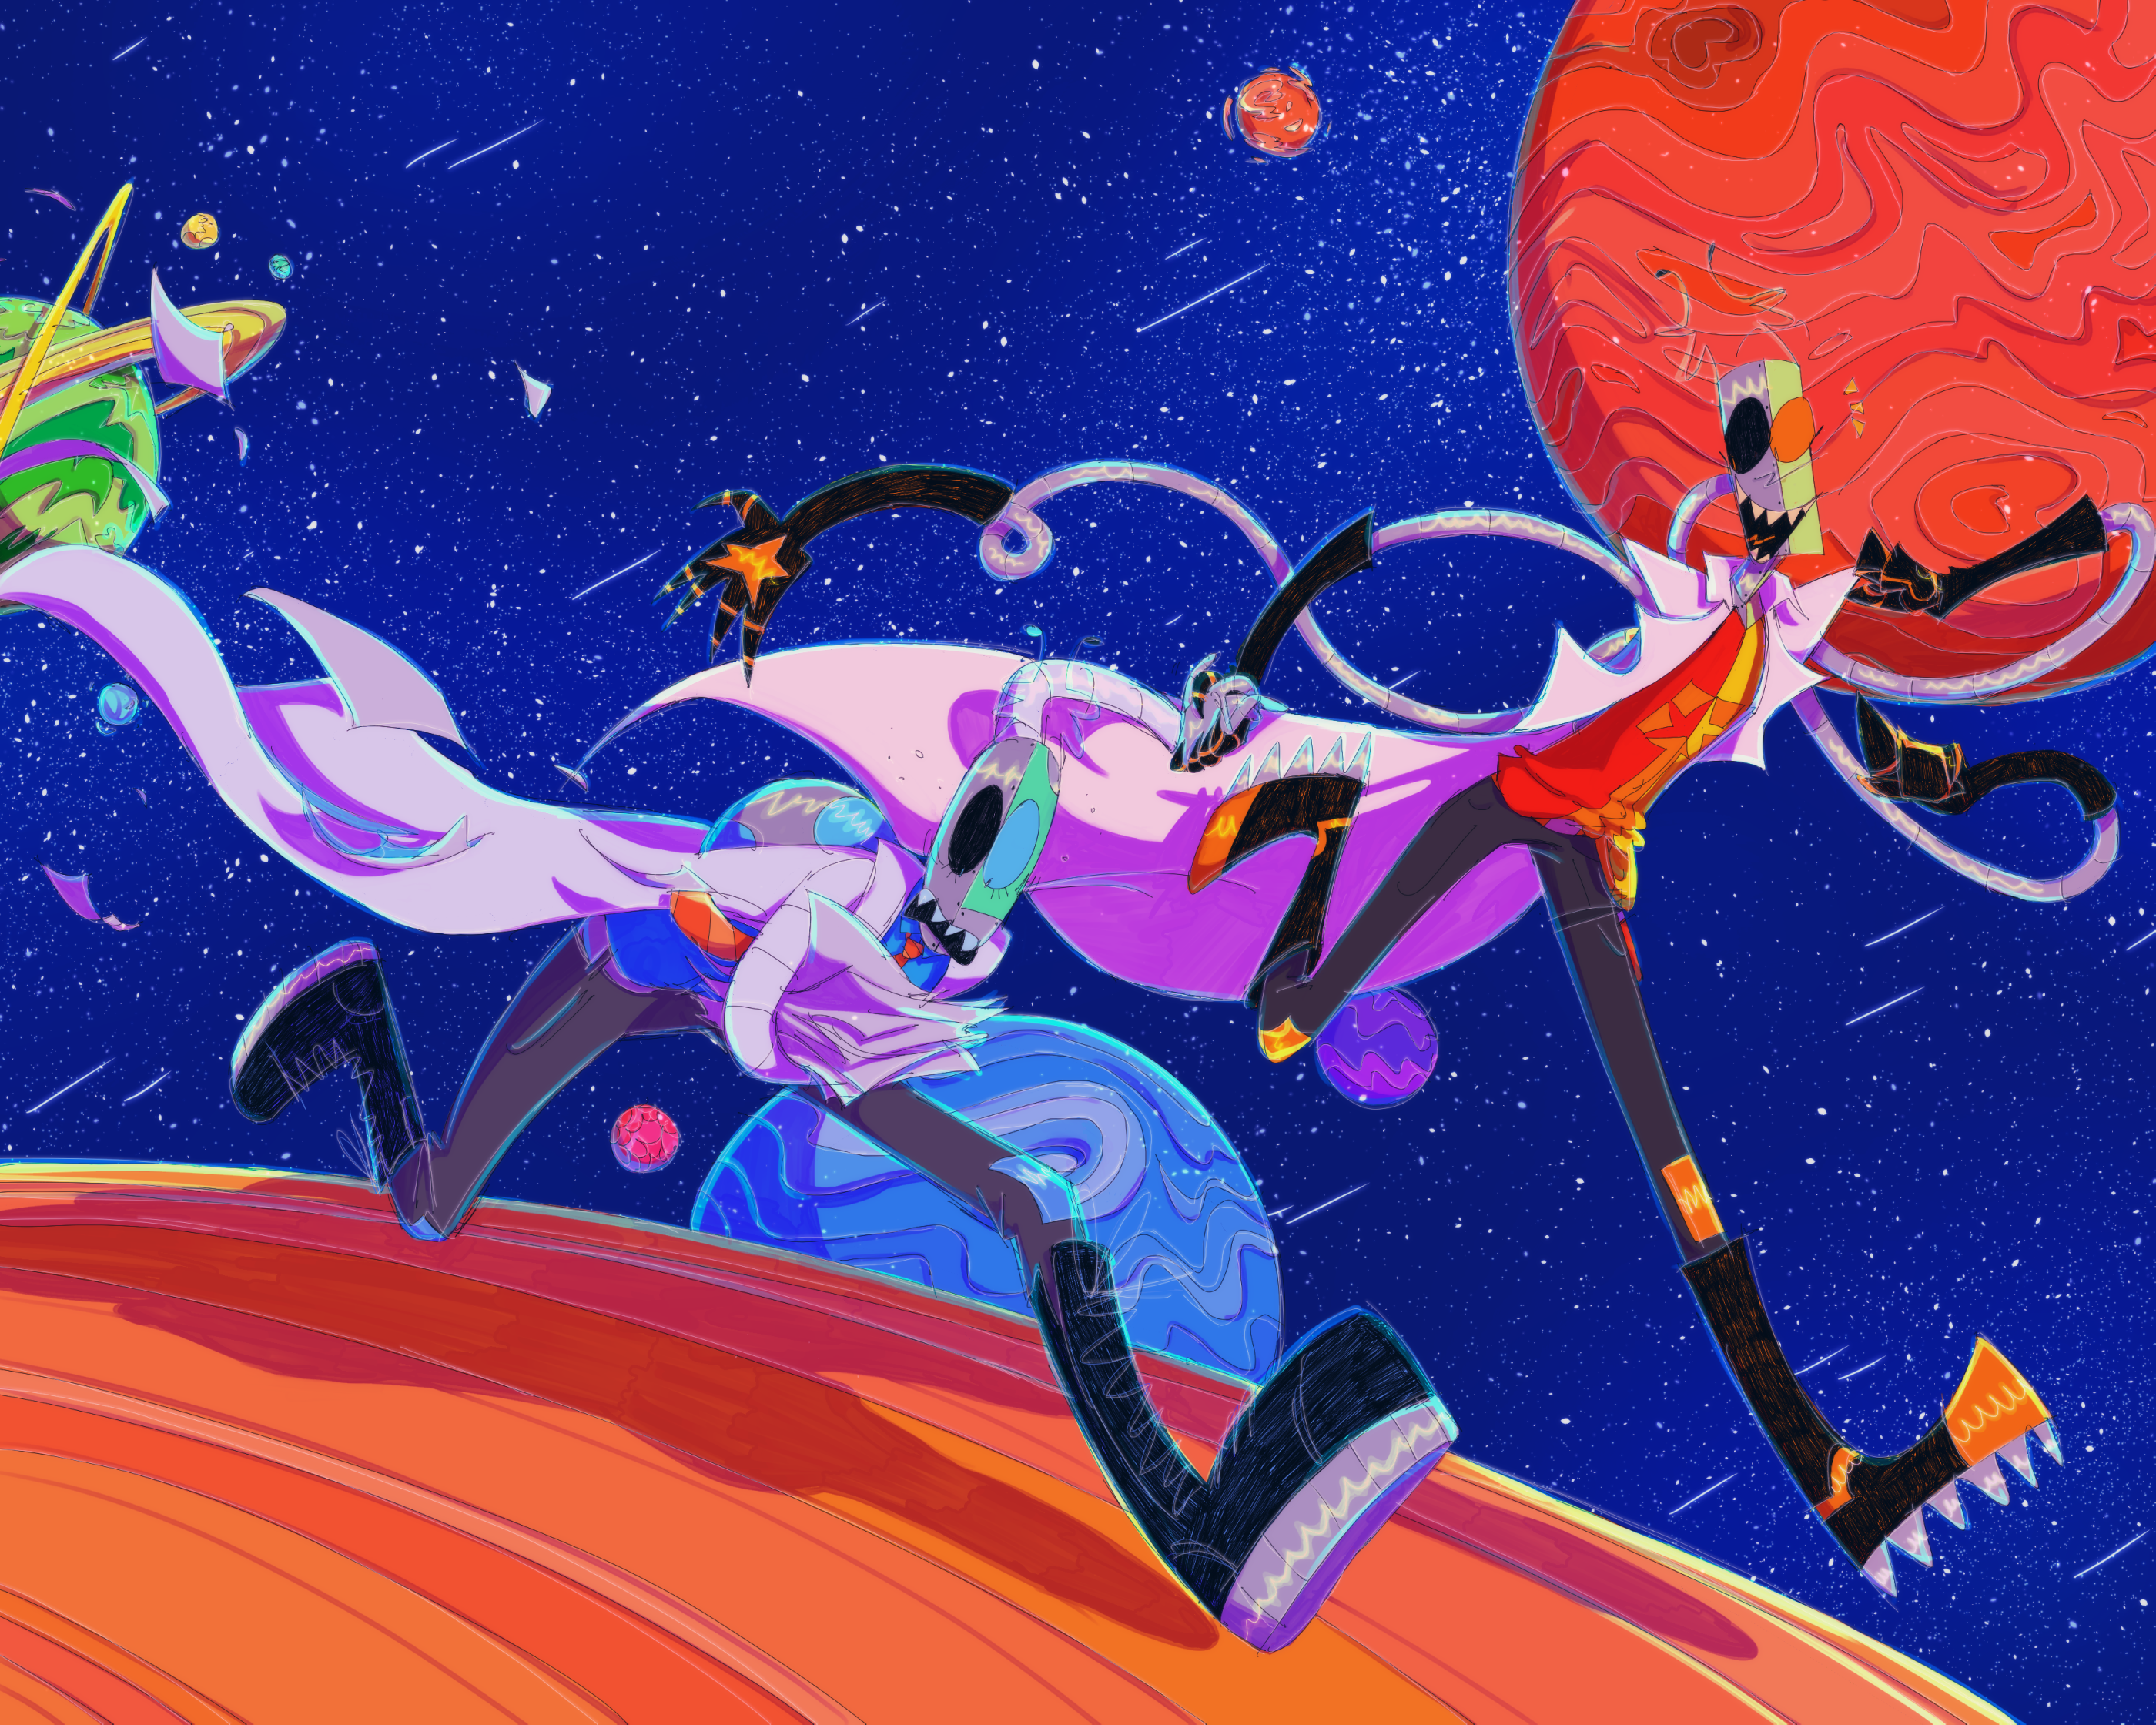 A drawing of two irken ocs, Rigel and Beetelgeuse, running along the rings of a planet in outer space. Rigel is blue toned and attempting to carry a stack of papers while Beetelgeuese is orange toned and dragging Rigel along. Other planets and stars can be seen in the background.